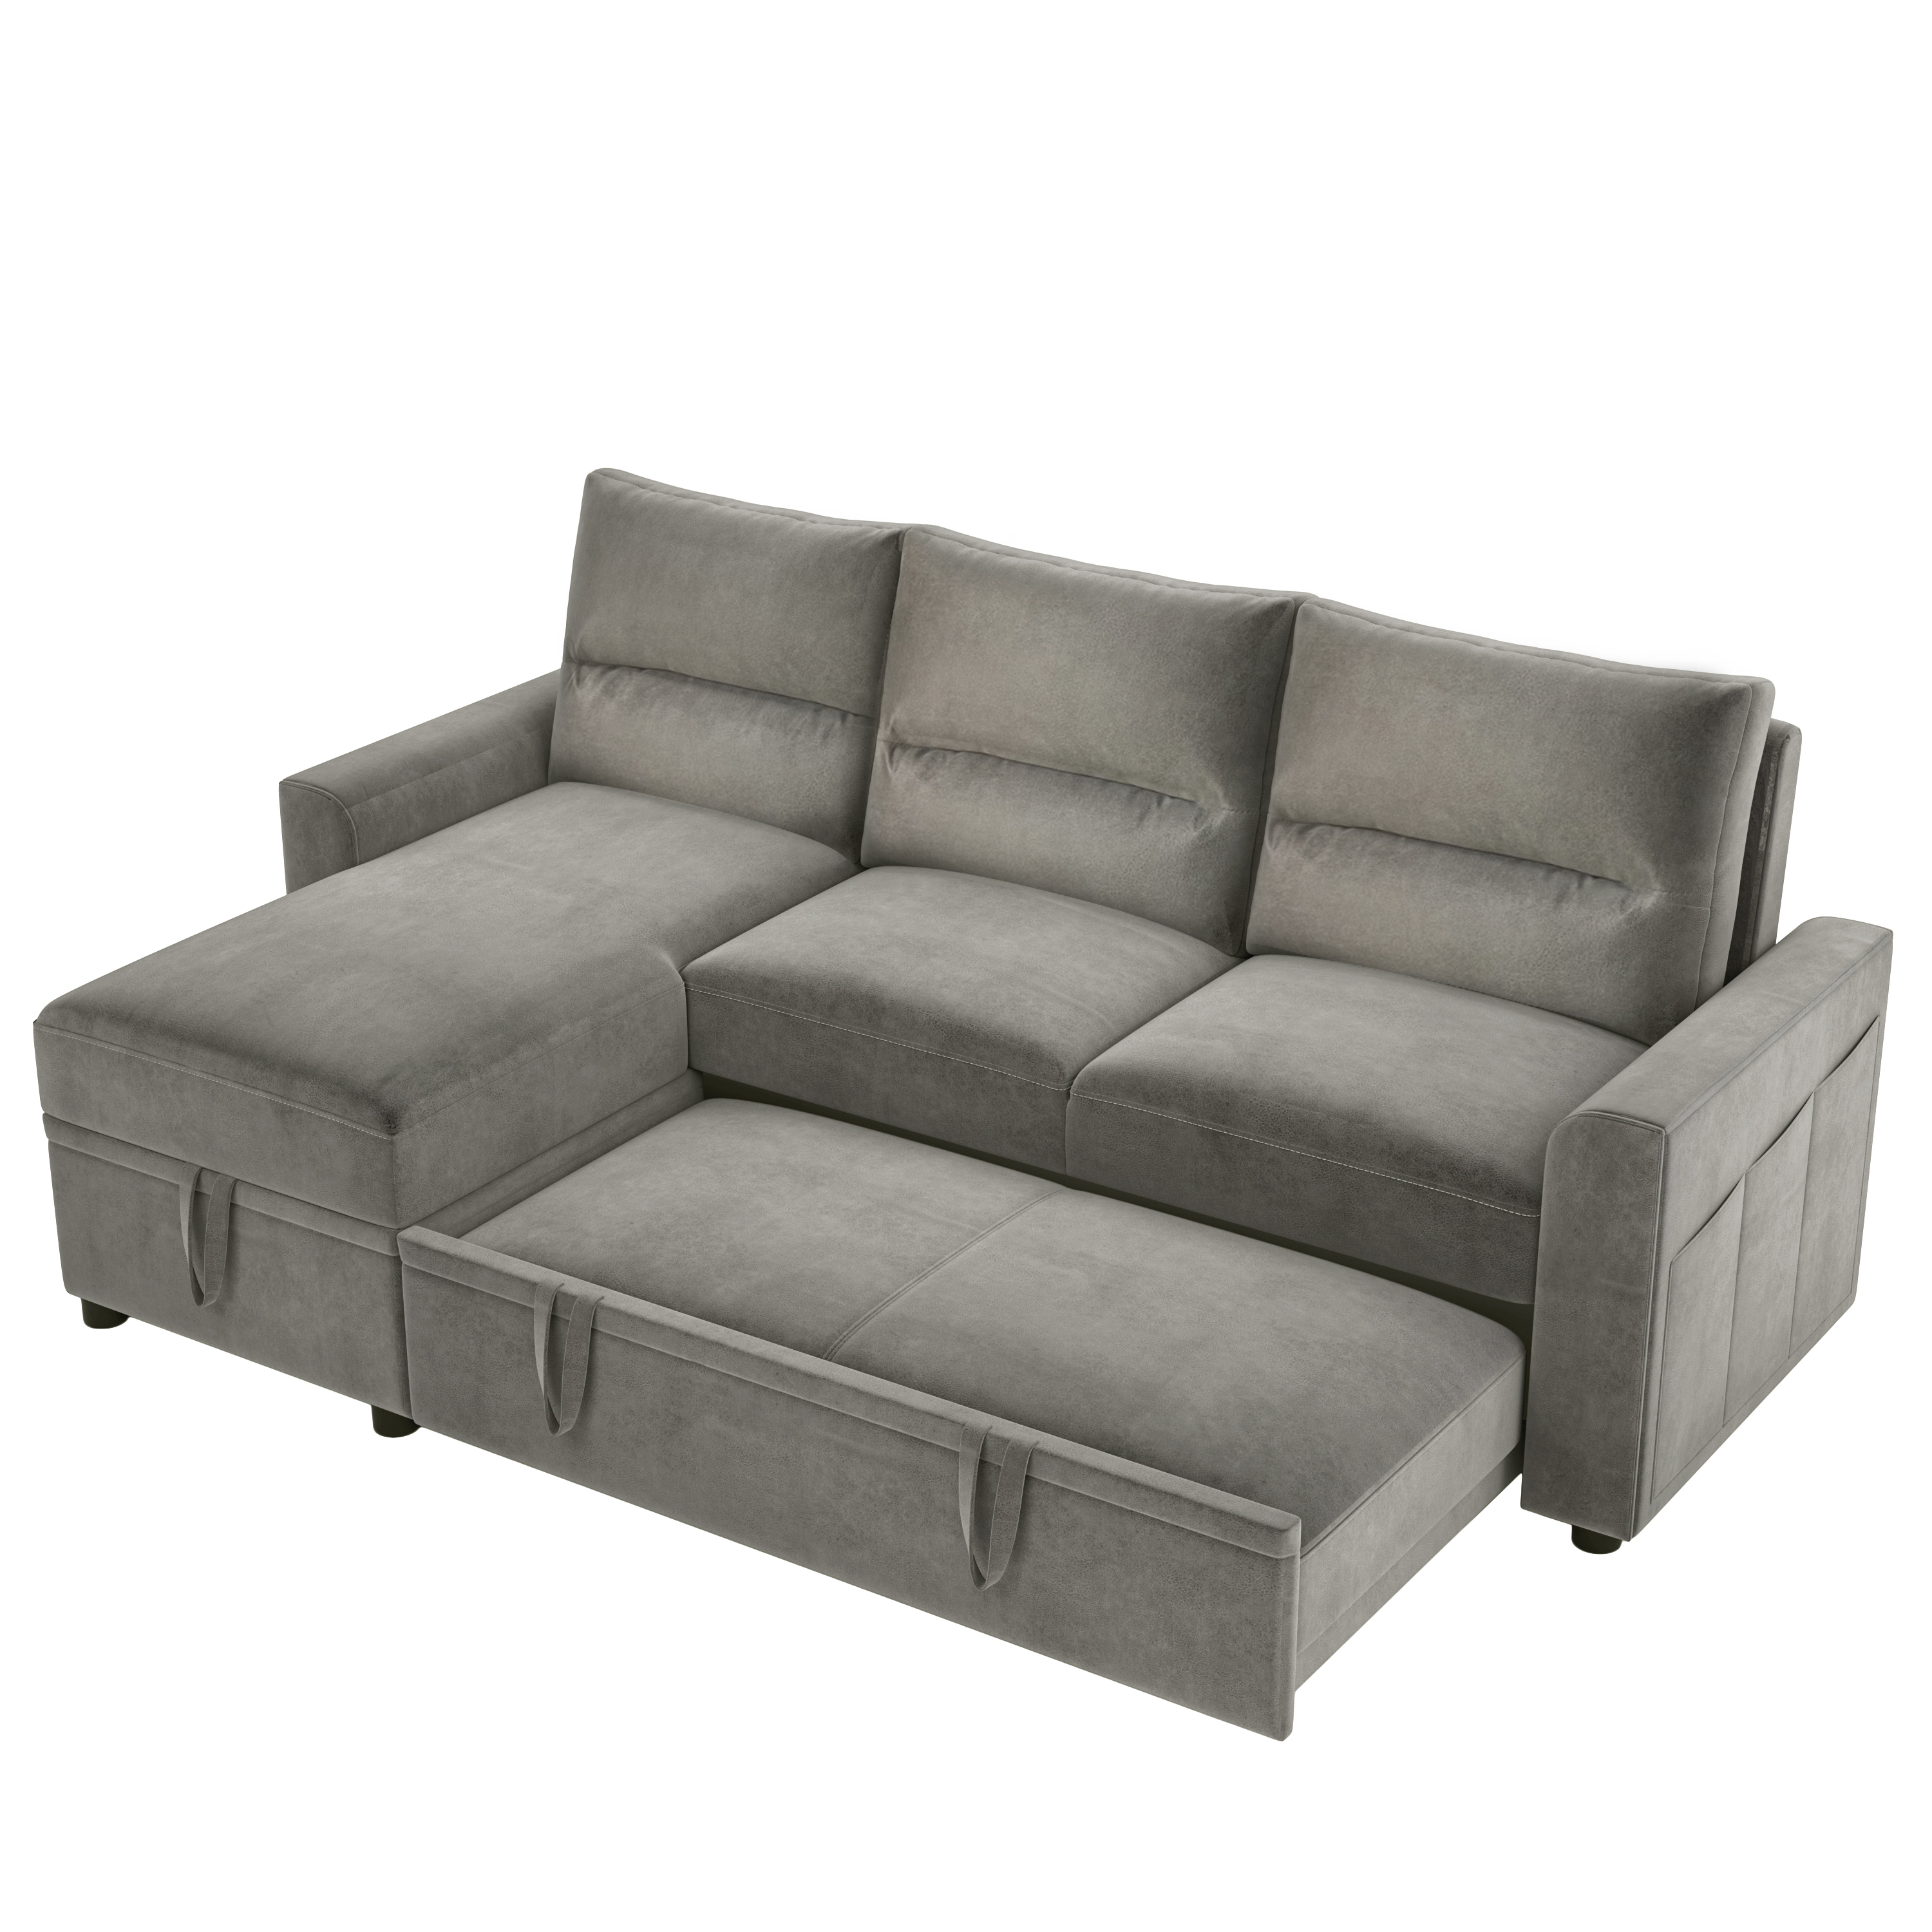 82.5" Reversible Pull out Sleeper Sectional Storage Sofa Bed with 6 Side pockets, Corner sofa-bed with storage Chaise,3 seat both left handed and right handed.